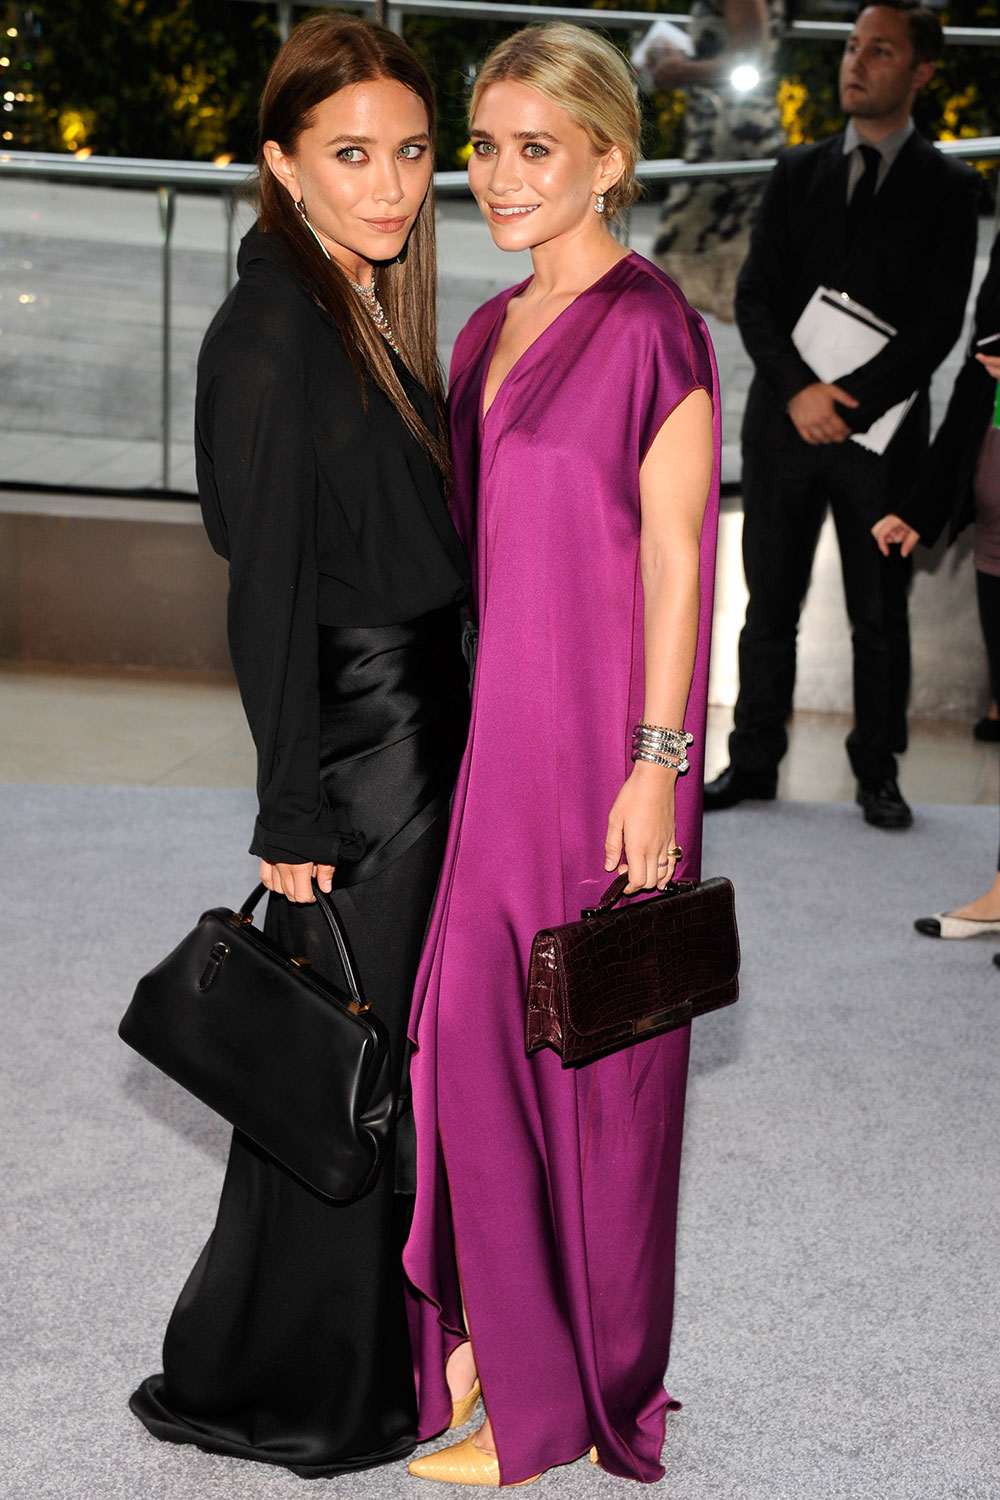 Mary-Kate Olsen and Ashley Olsen at the CFDA Fashion Awards in 2012